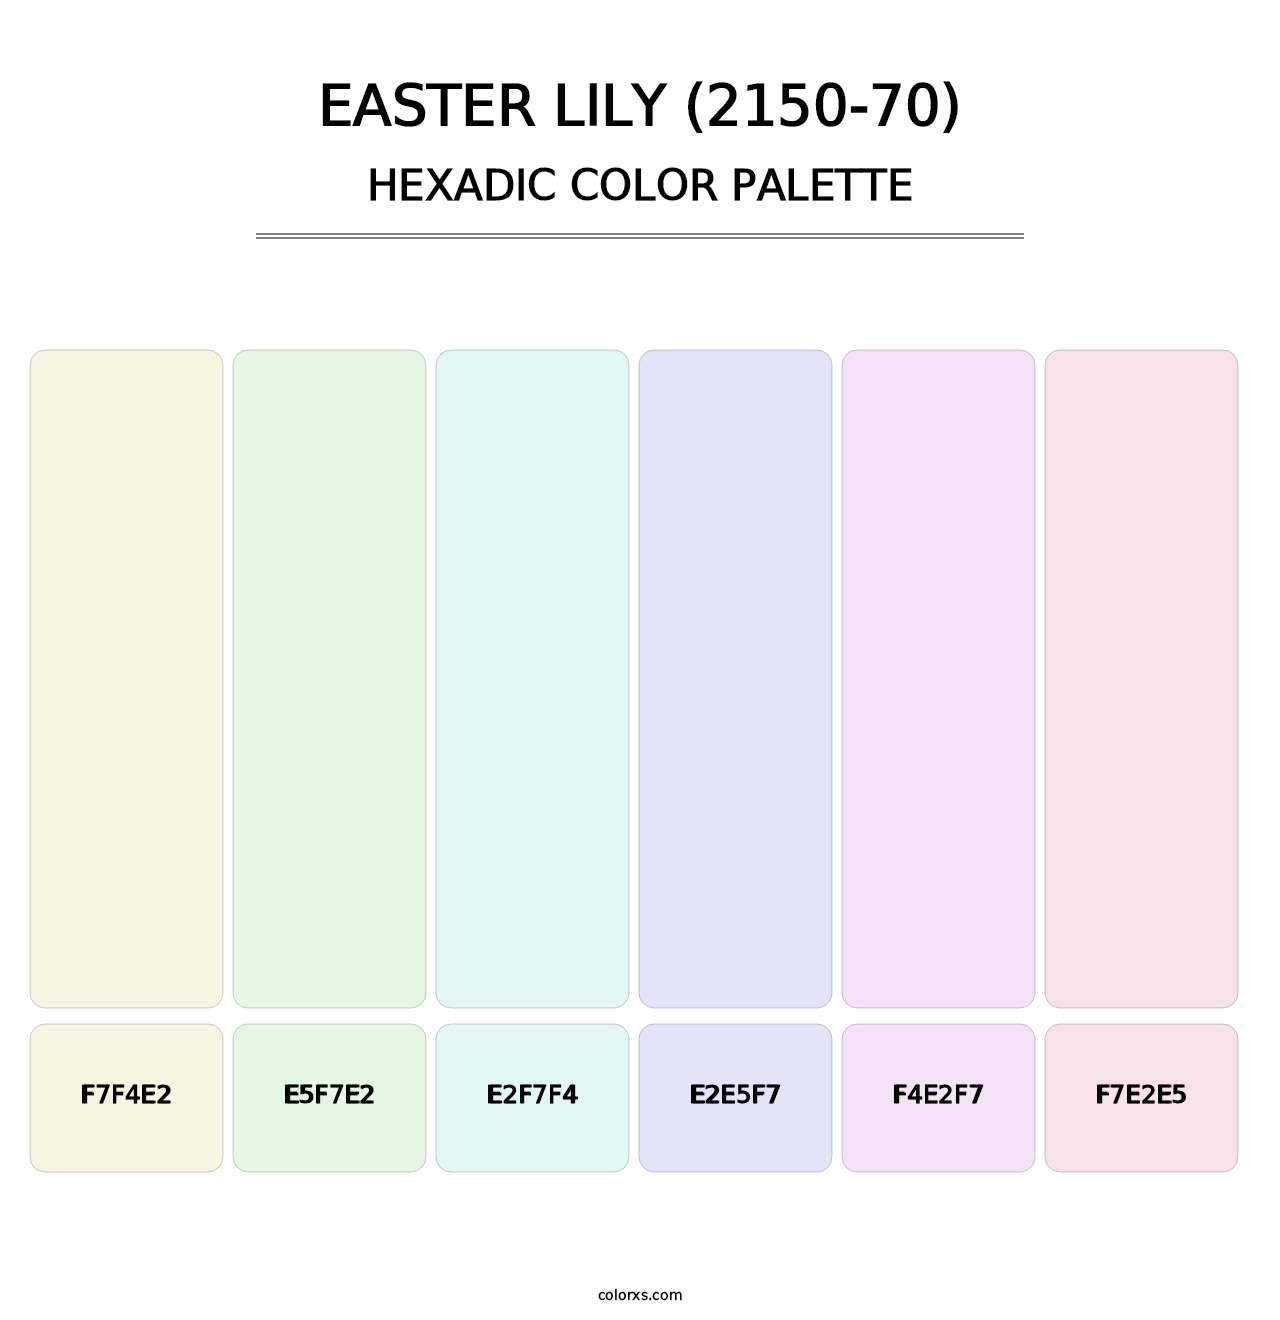 Easter Lily (2150-70) - Hexadic Color Palette